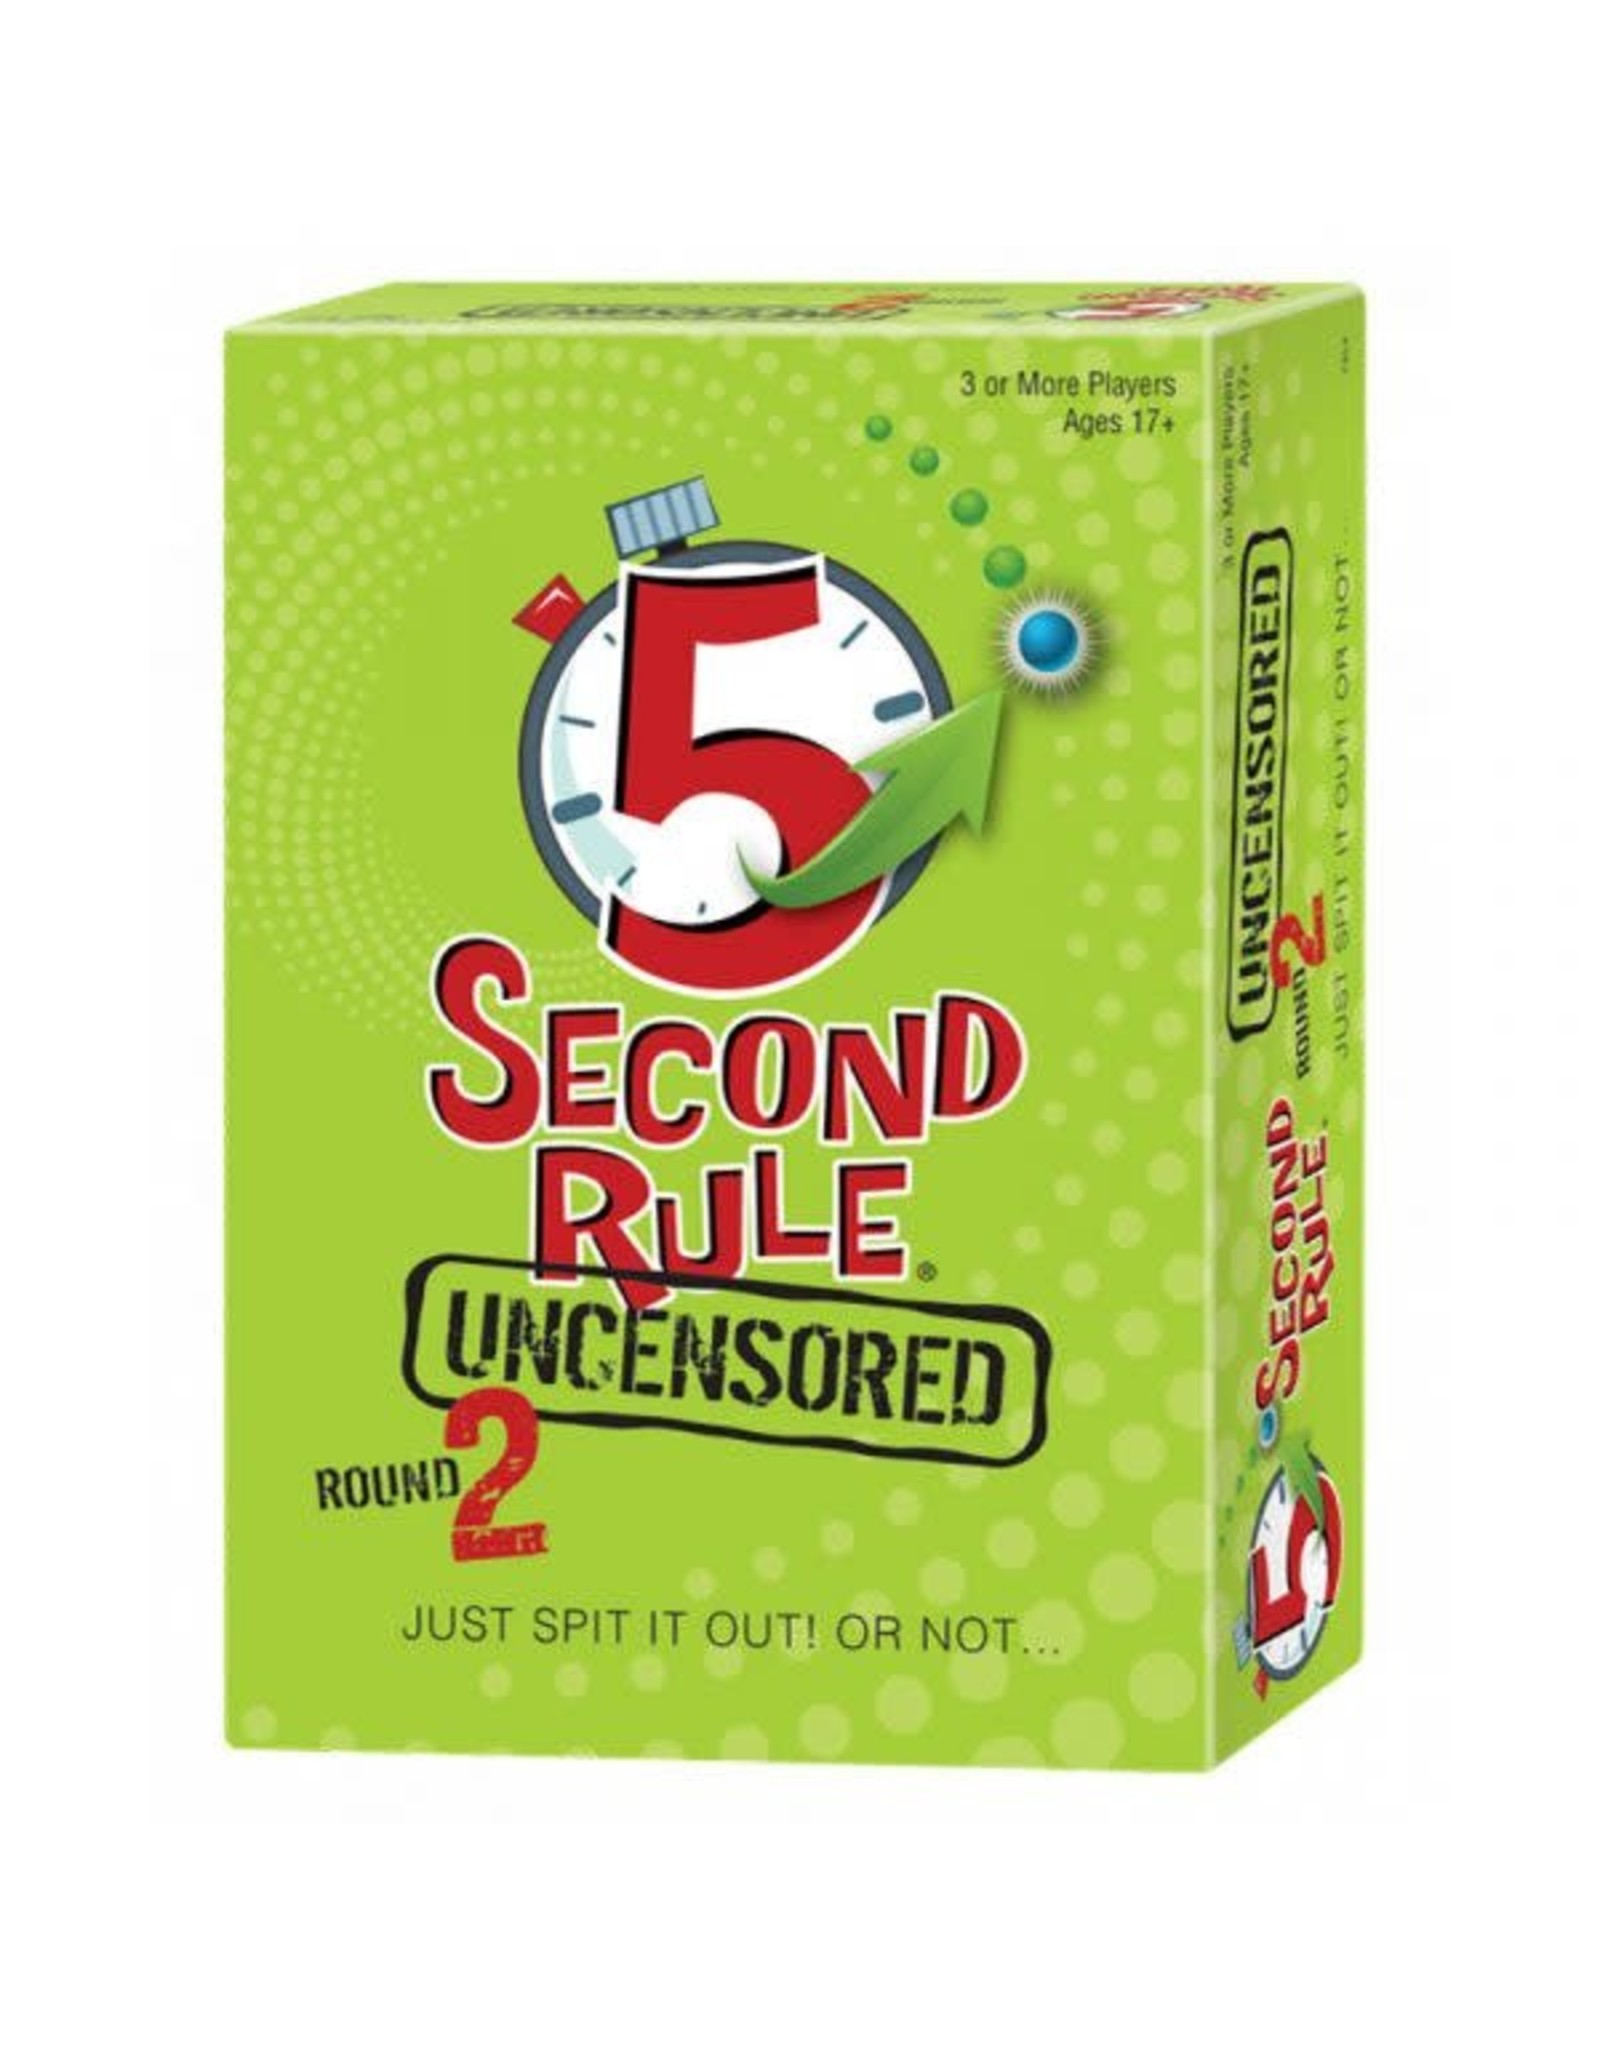 Play Monster 5 Second Rule Uncensored - Round 2